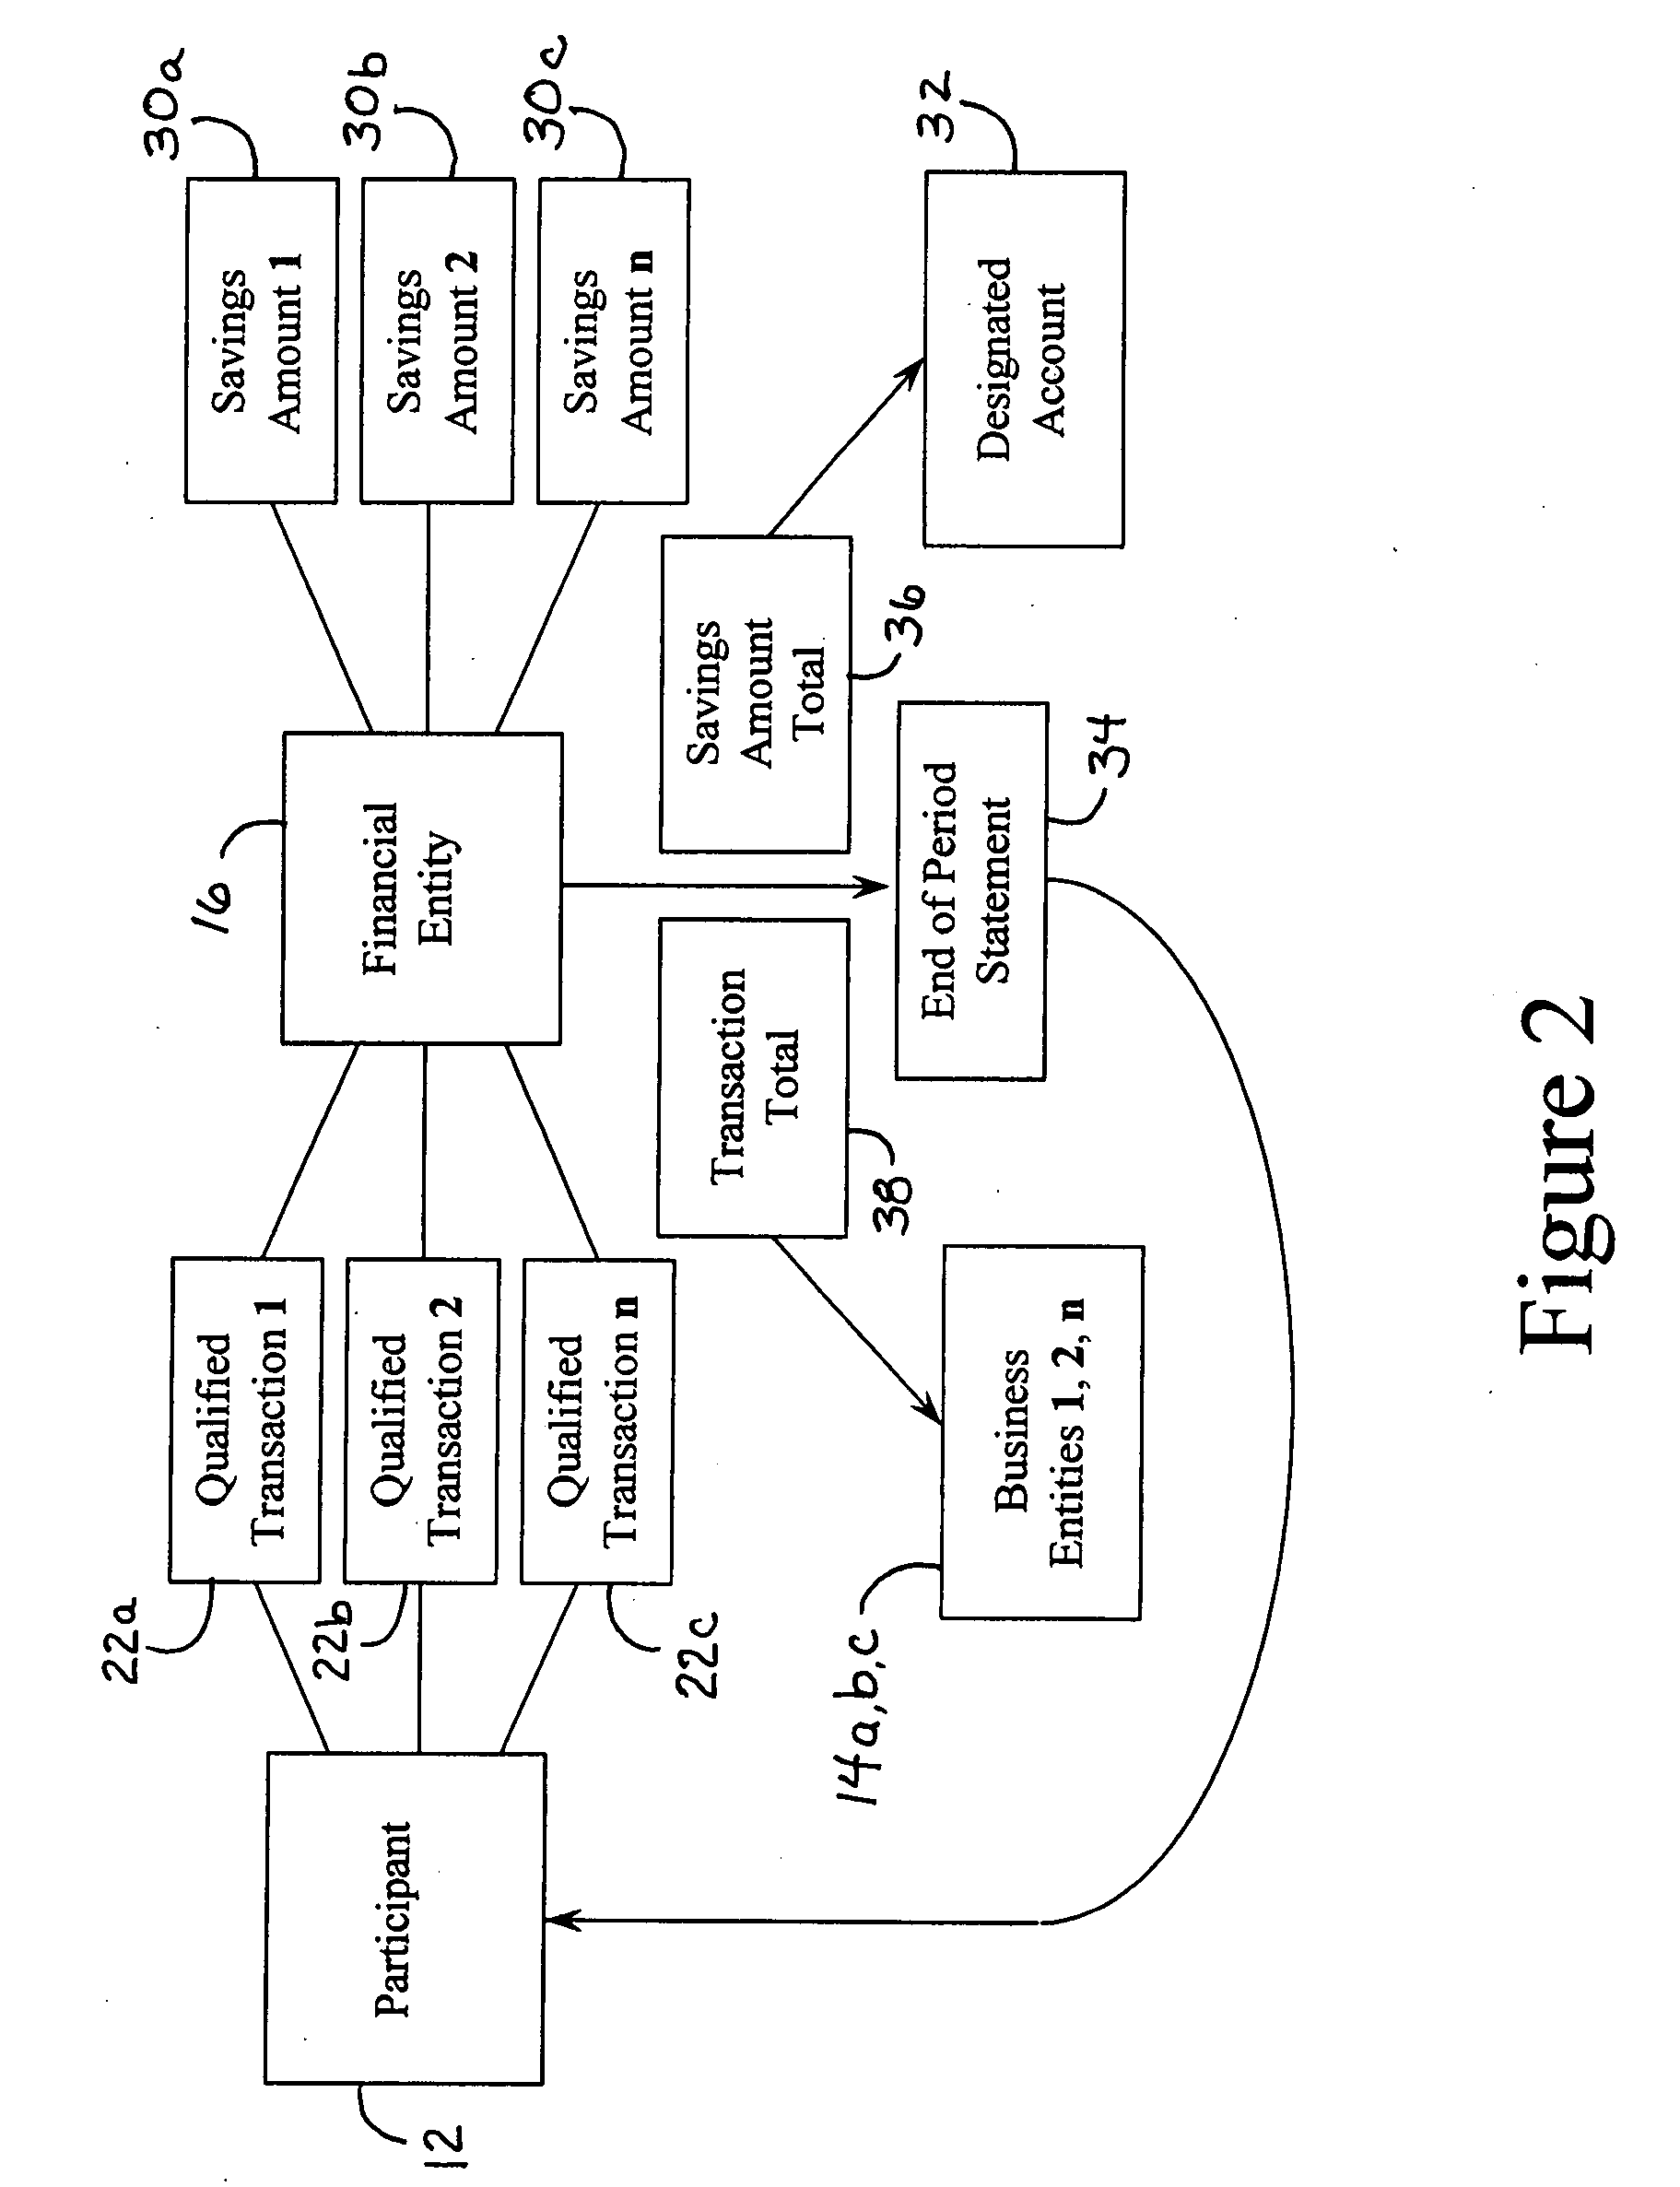 Method for transferring monies, coinciding with unrelated transactions, to a designated account